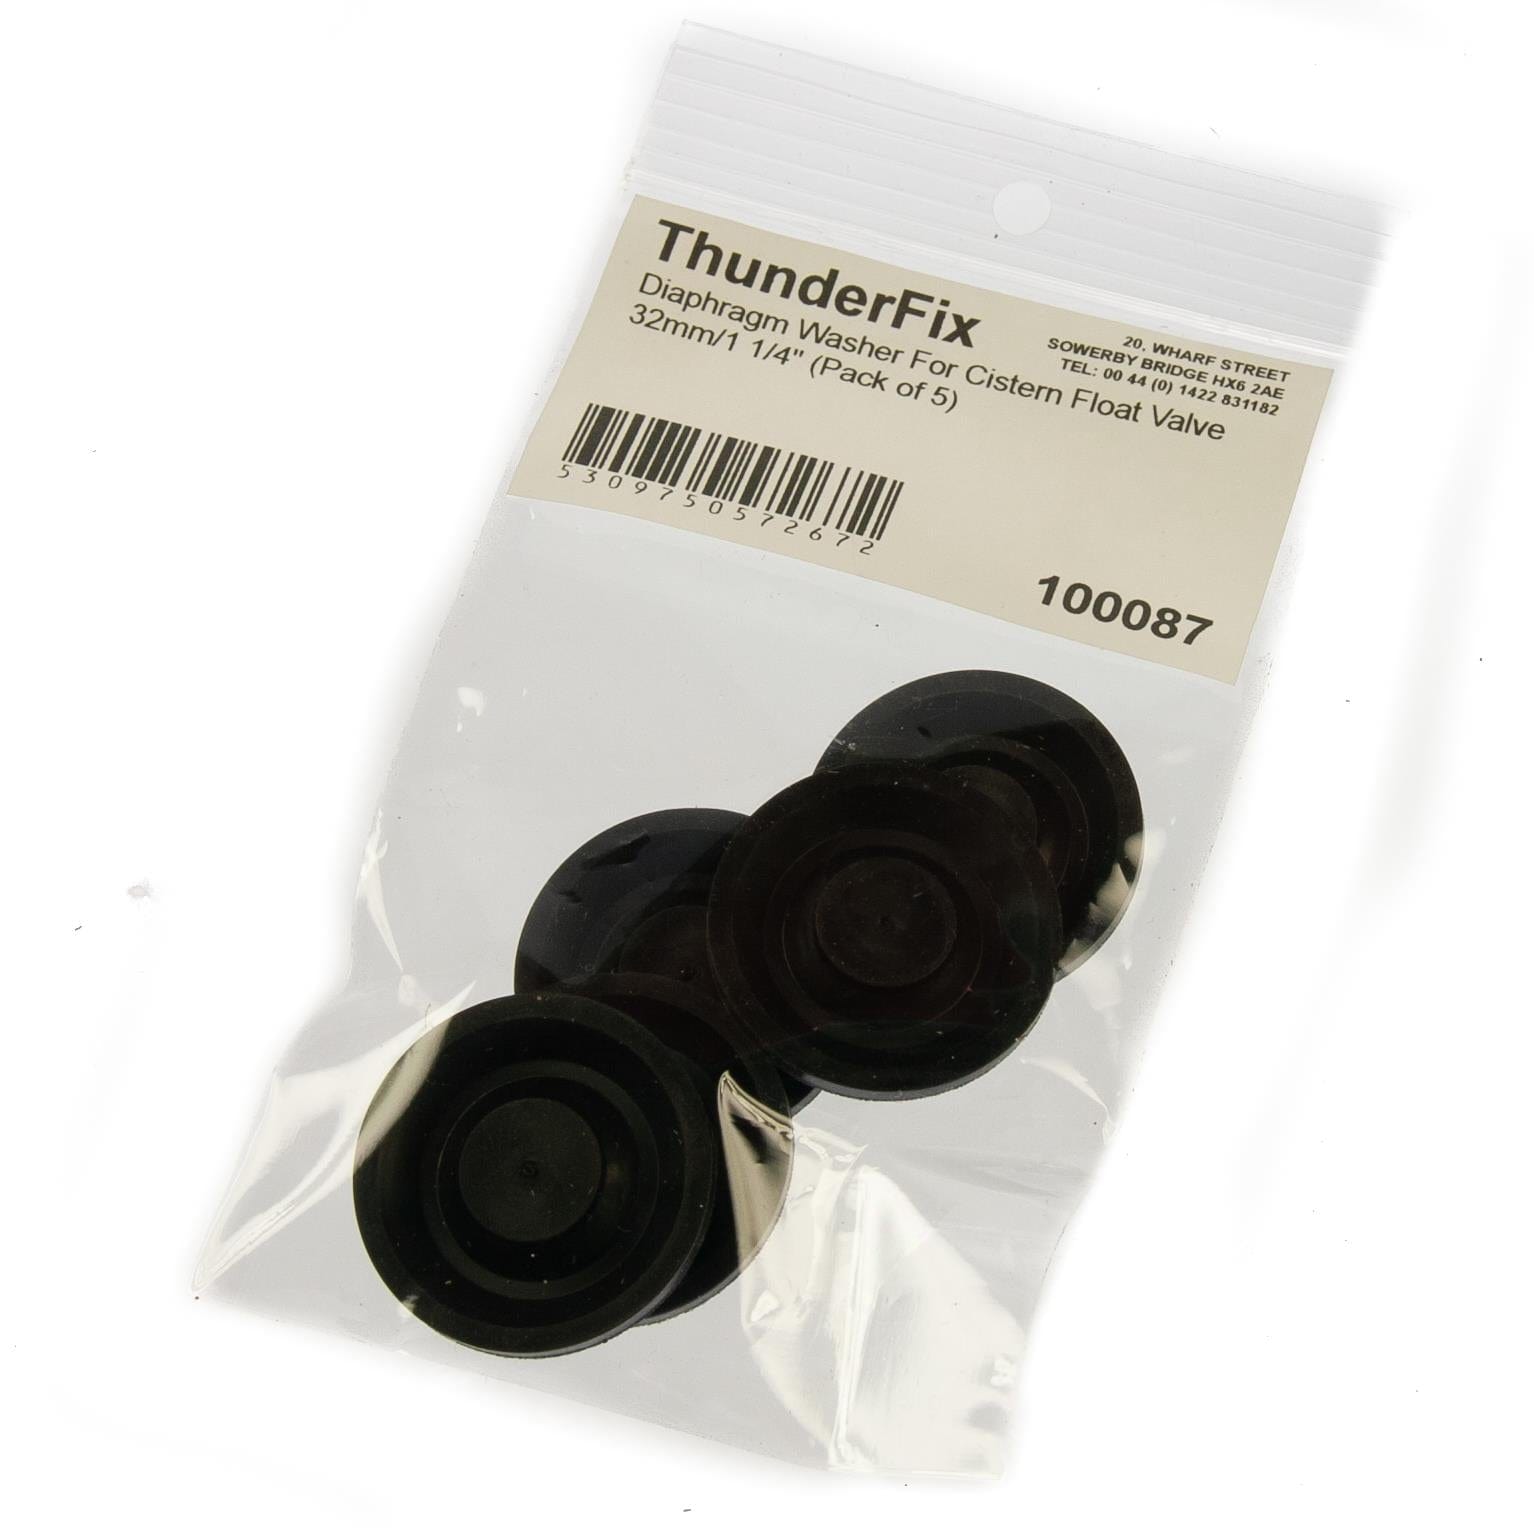 Diaphragm Washer For Cistern Float Valve 32mm/1 1/4" (Pack of 5) Inlet Valve Washers Thunderfix 100087